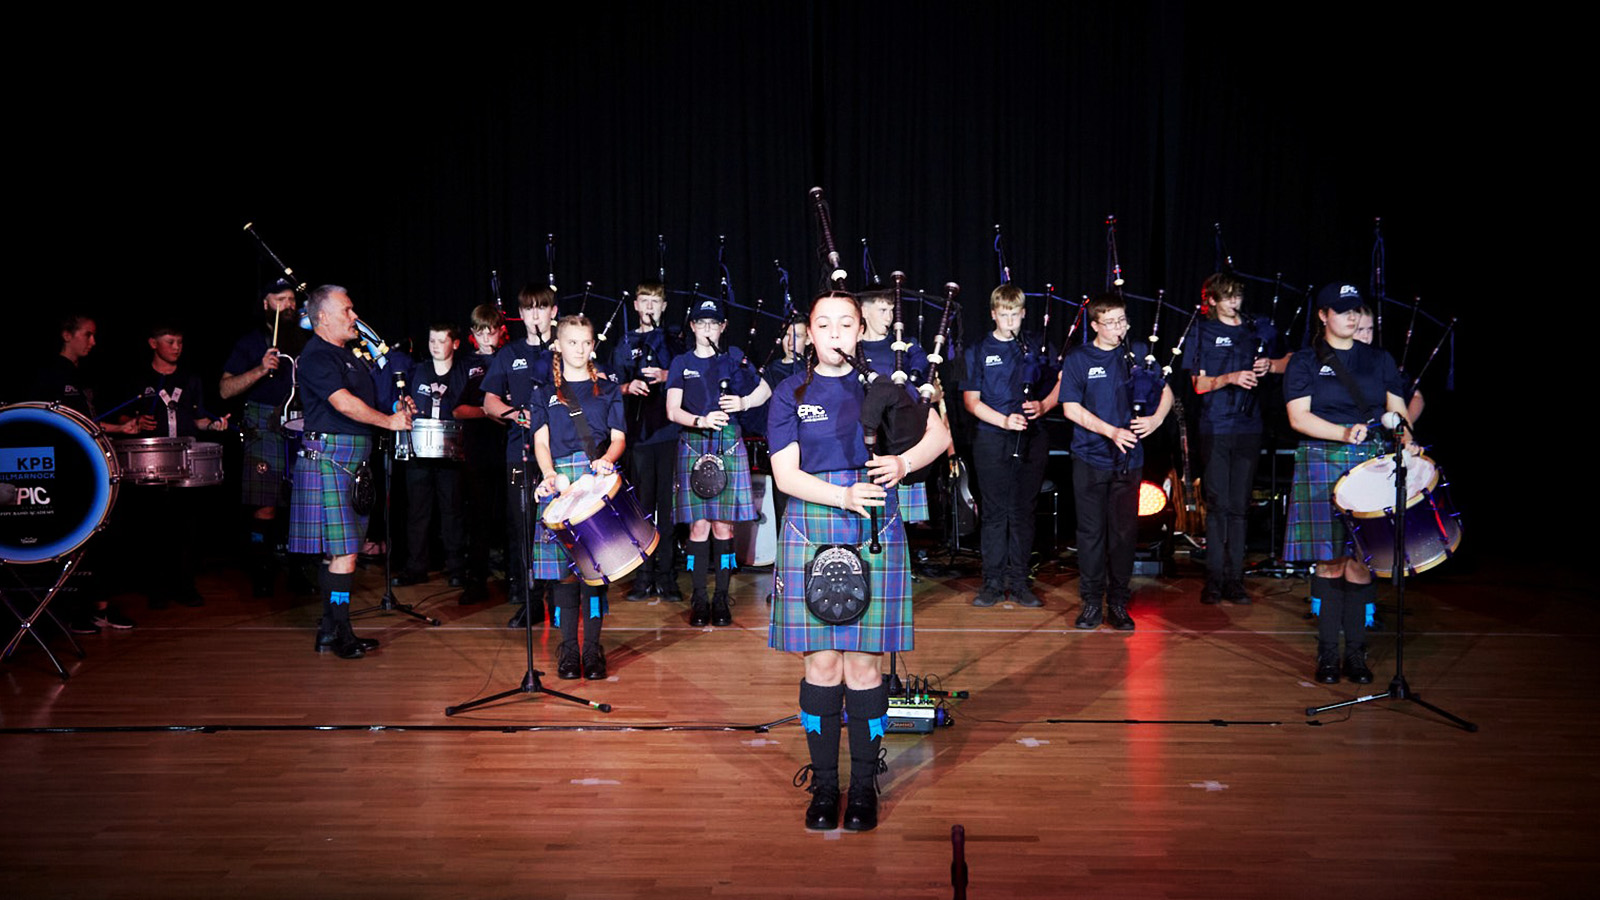 A pipe band of school pupils perform on a stage